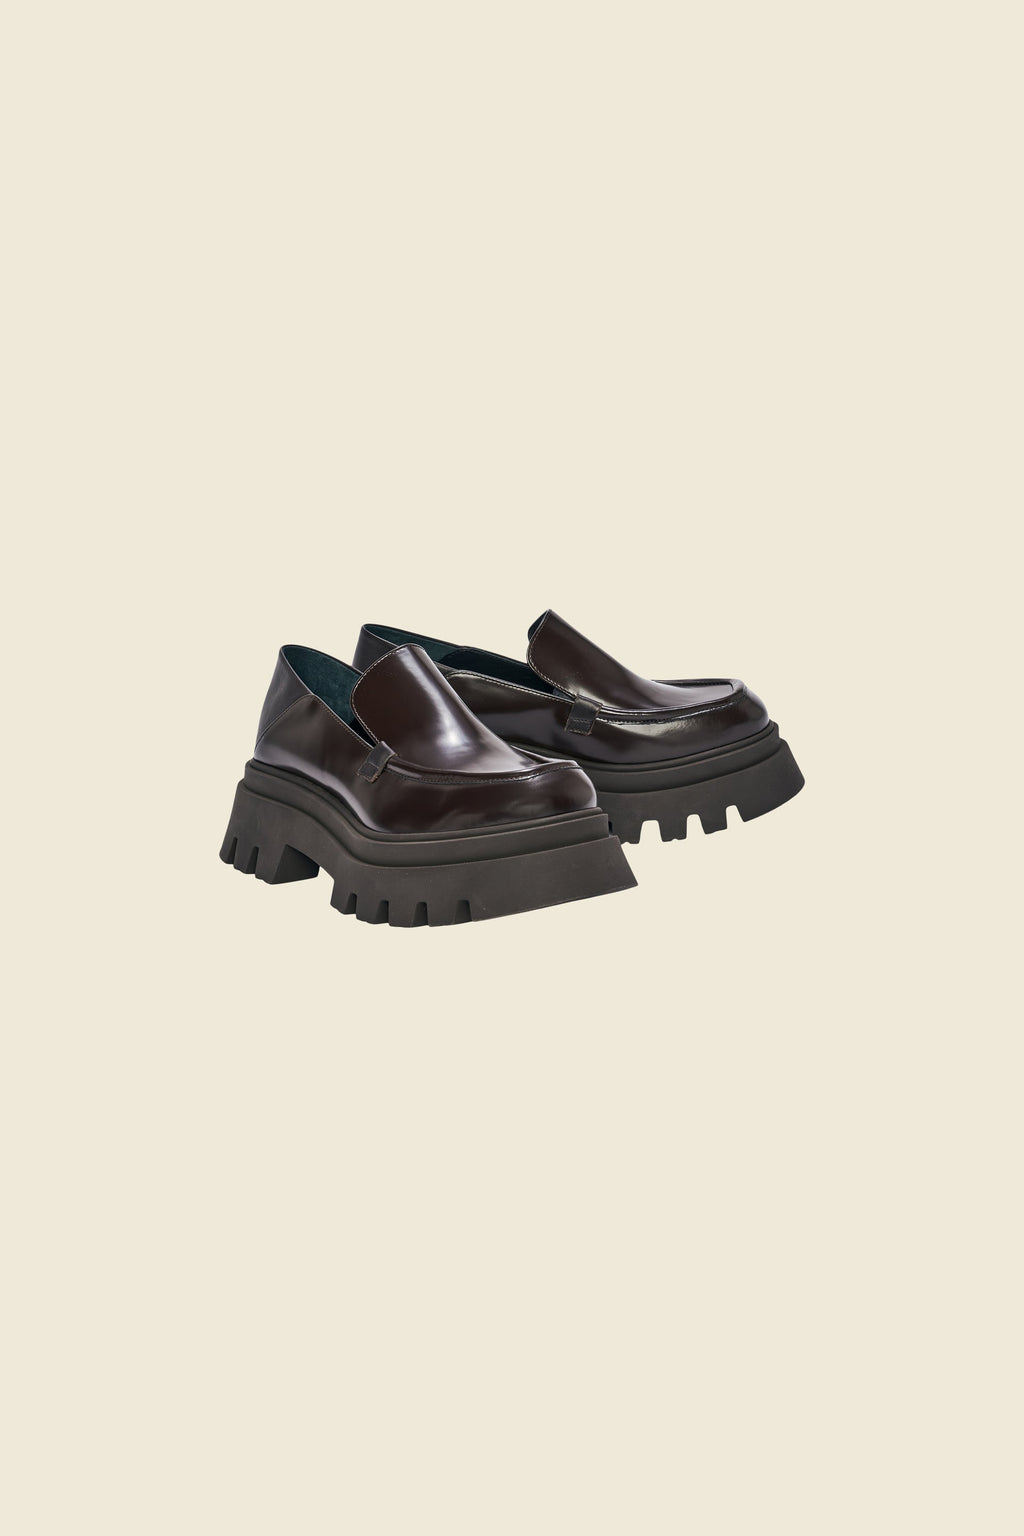 Dorothee Schumacher-OUTLET-SALE-GLOSSY AMBITION loafer--ARCHIVIST